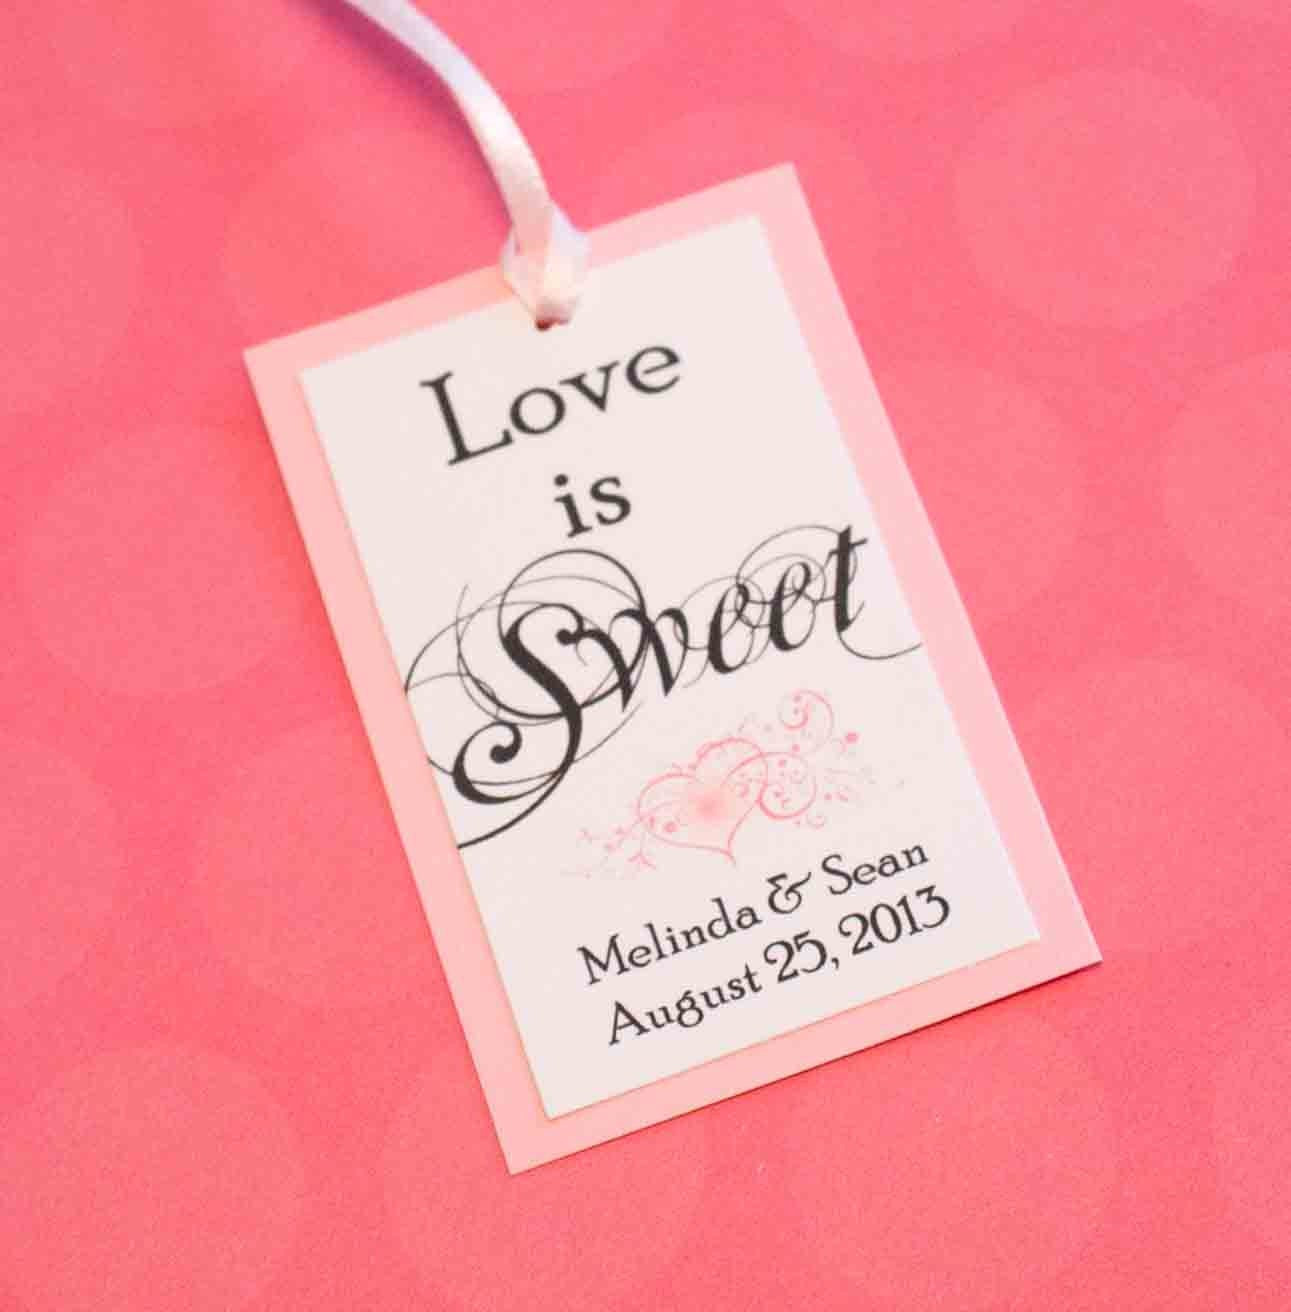 Wedding Tags For Favors
 Items similar to Custom Love is Sweet Wedding Favor